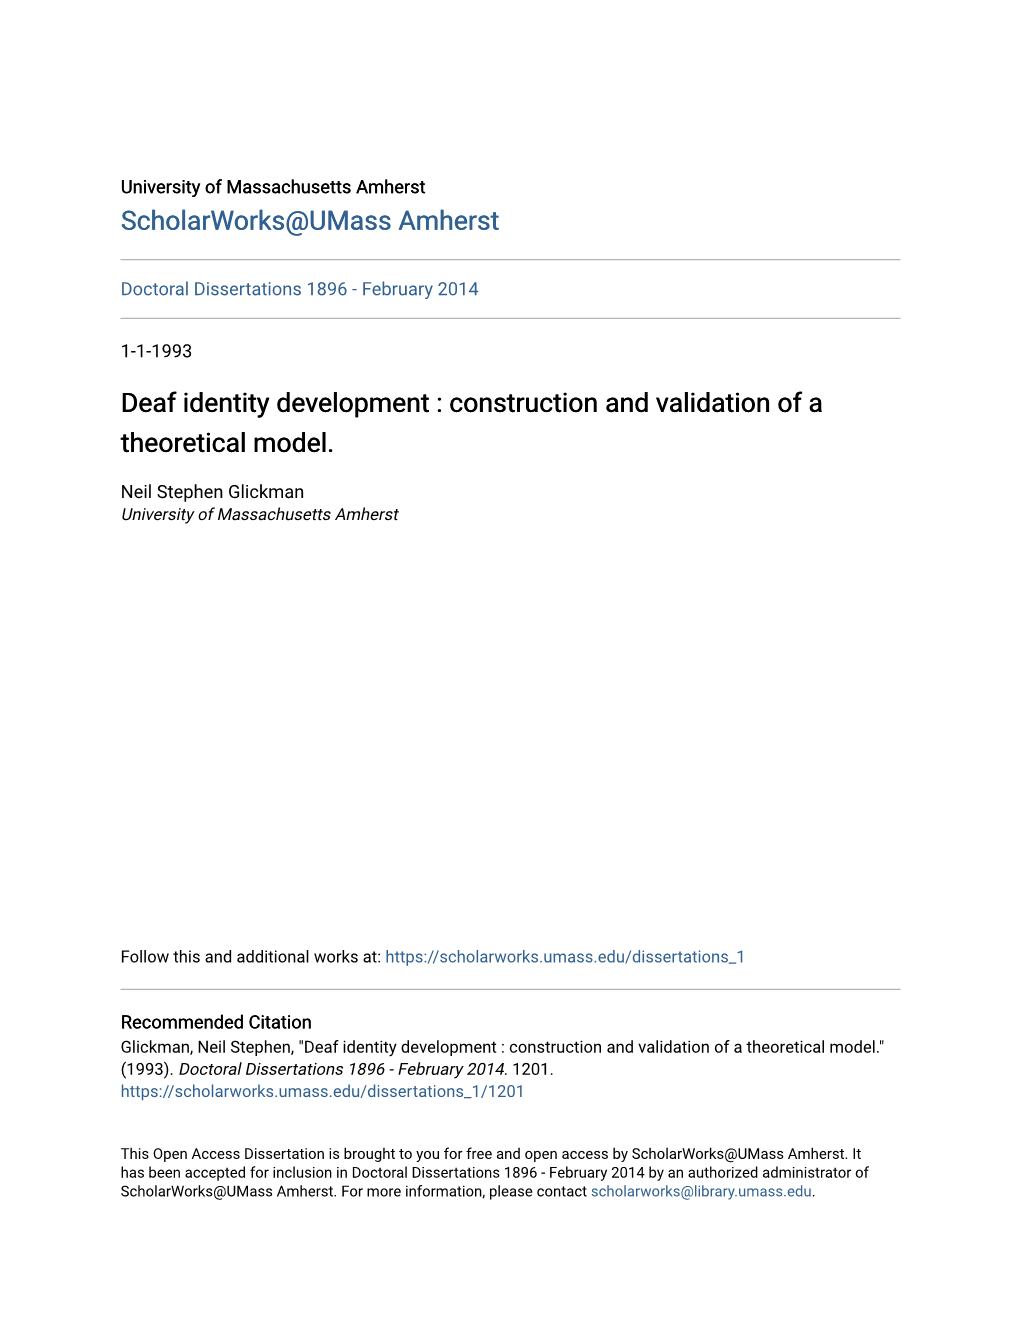 Deaf Identity Development : Construction and Validation of a Theoretical Model